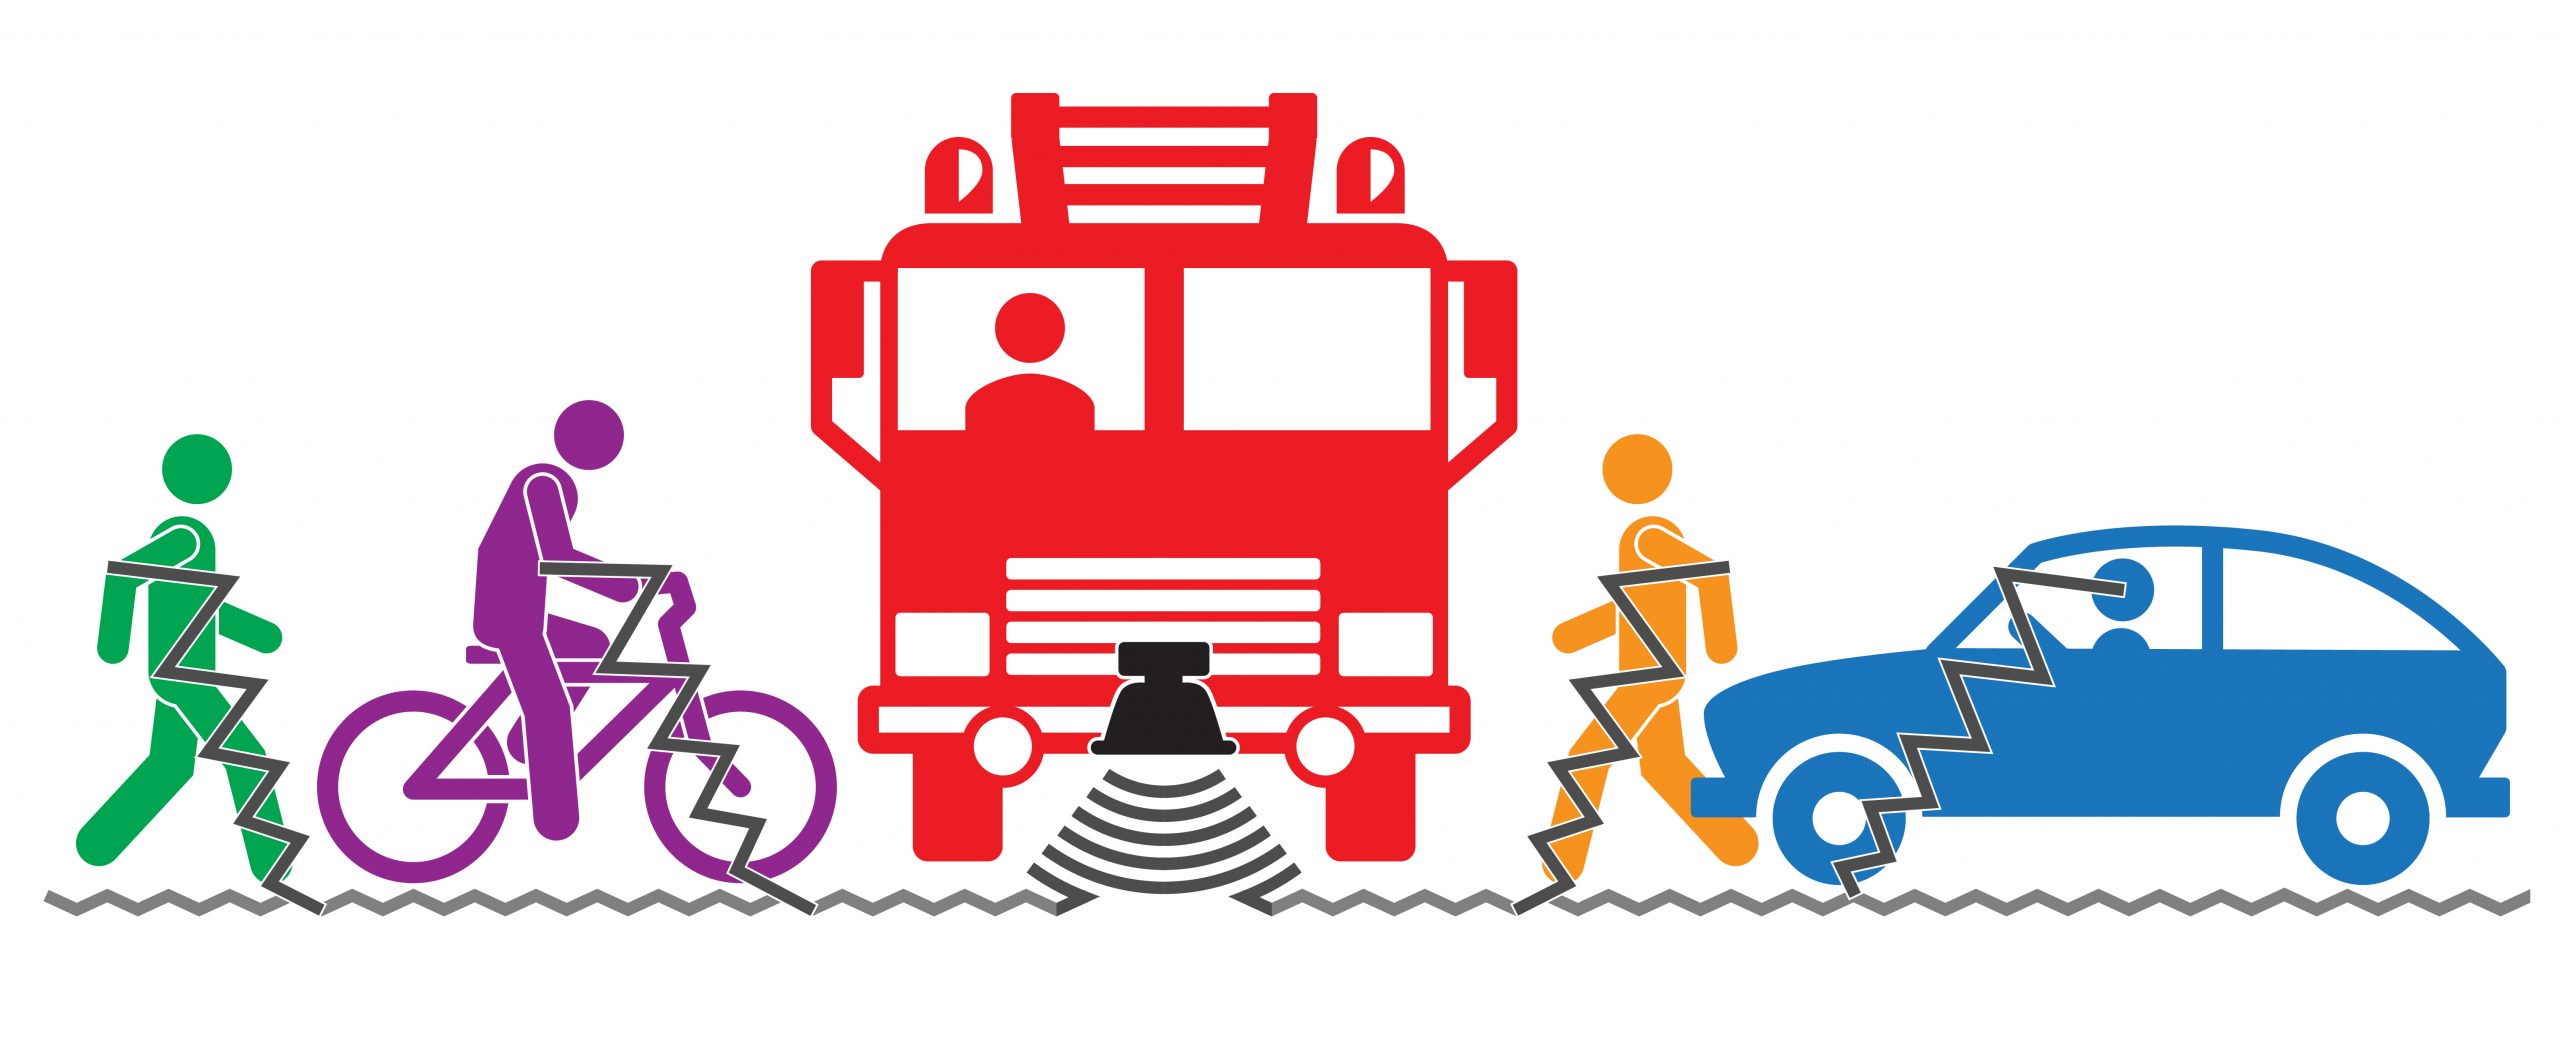 Rumble Effect Illustration Showing the Effect on Pedestrians, Cyclists and Drivers, Emanating from Fire Engine